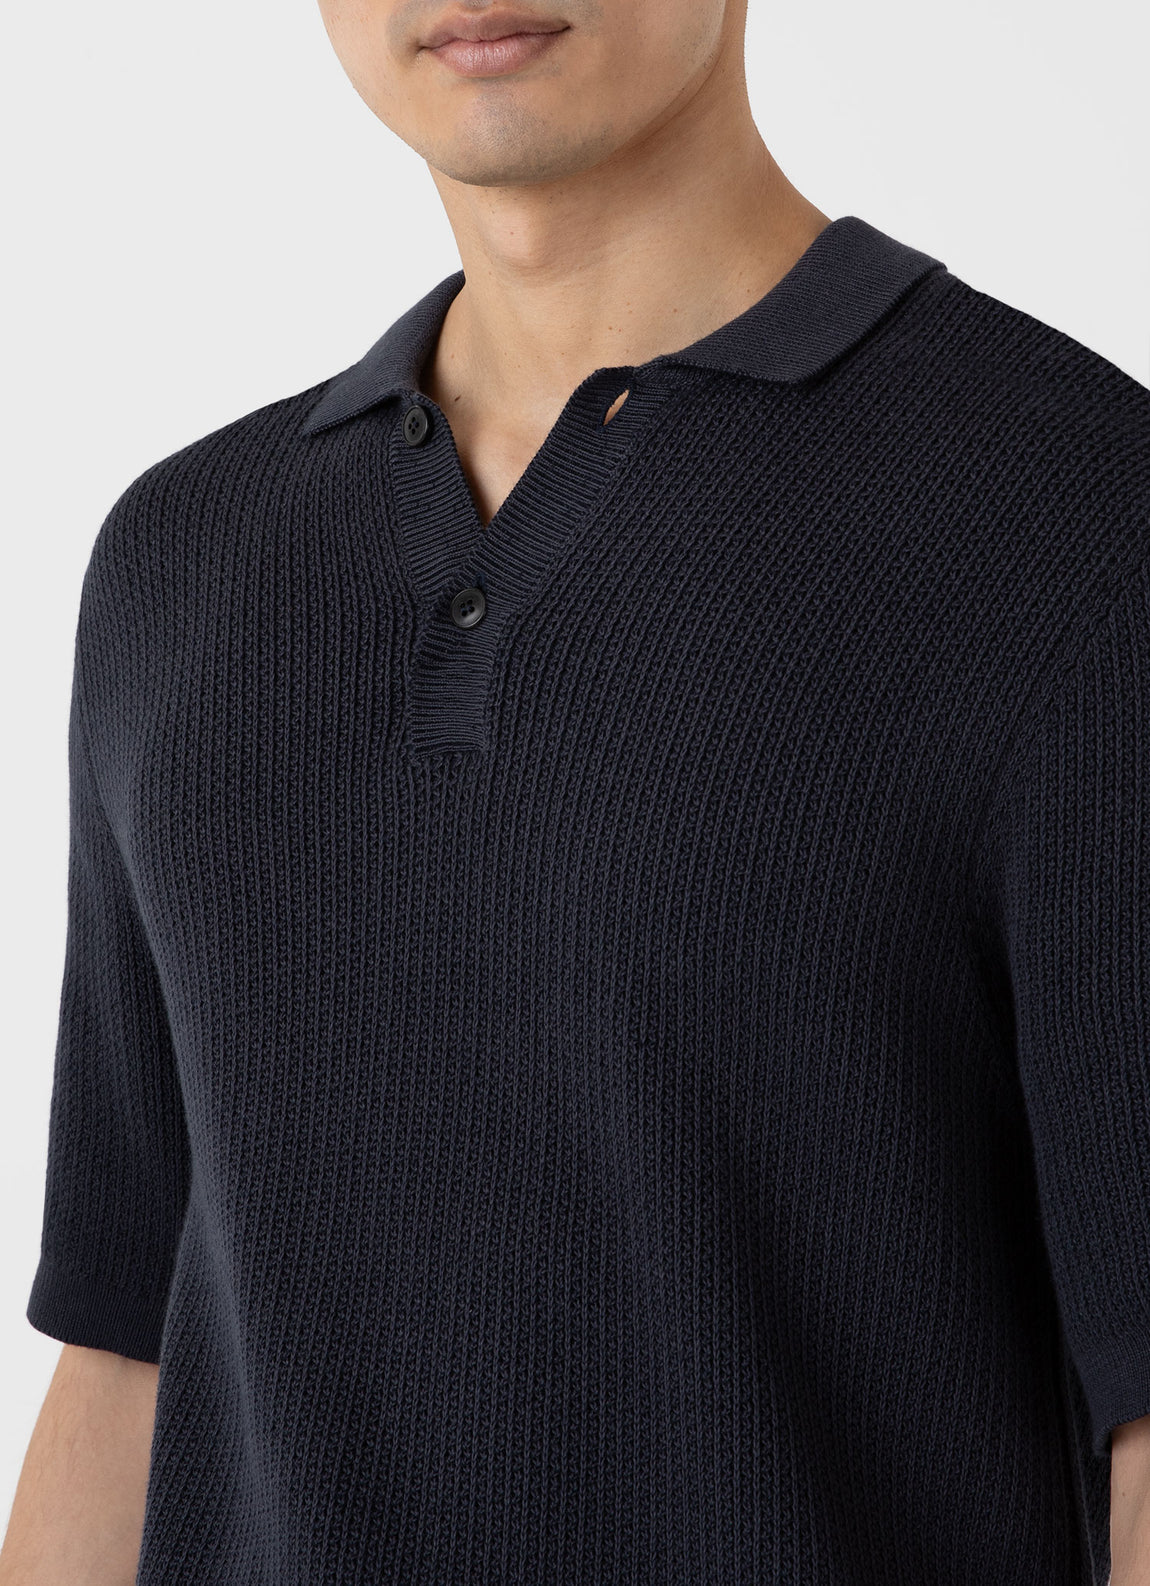 Men's Textured Knit Polo Shirt in Navy